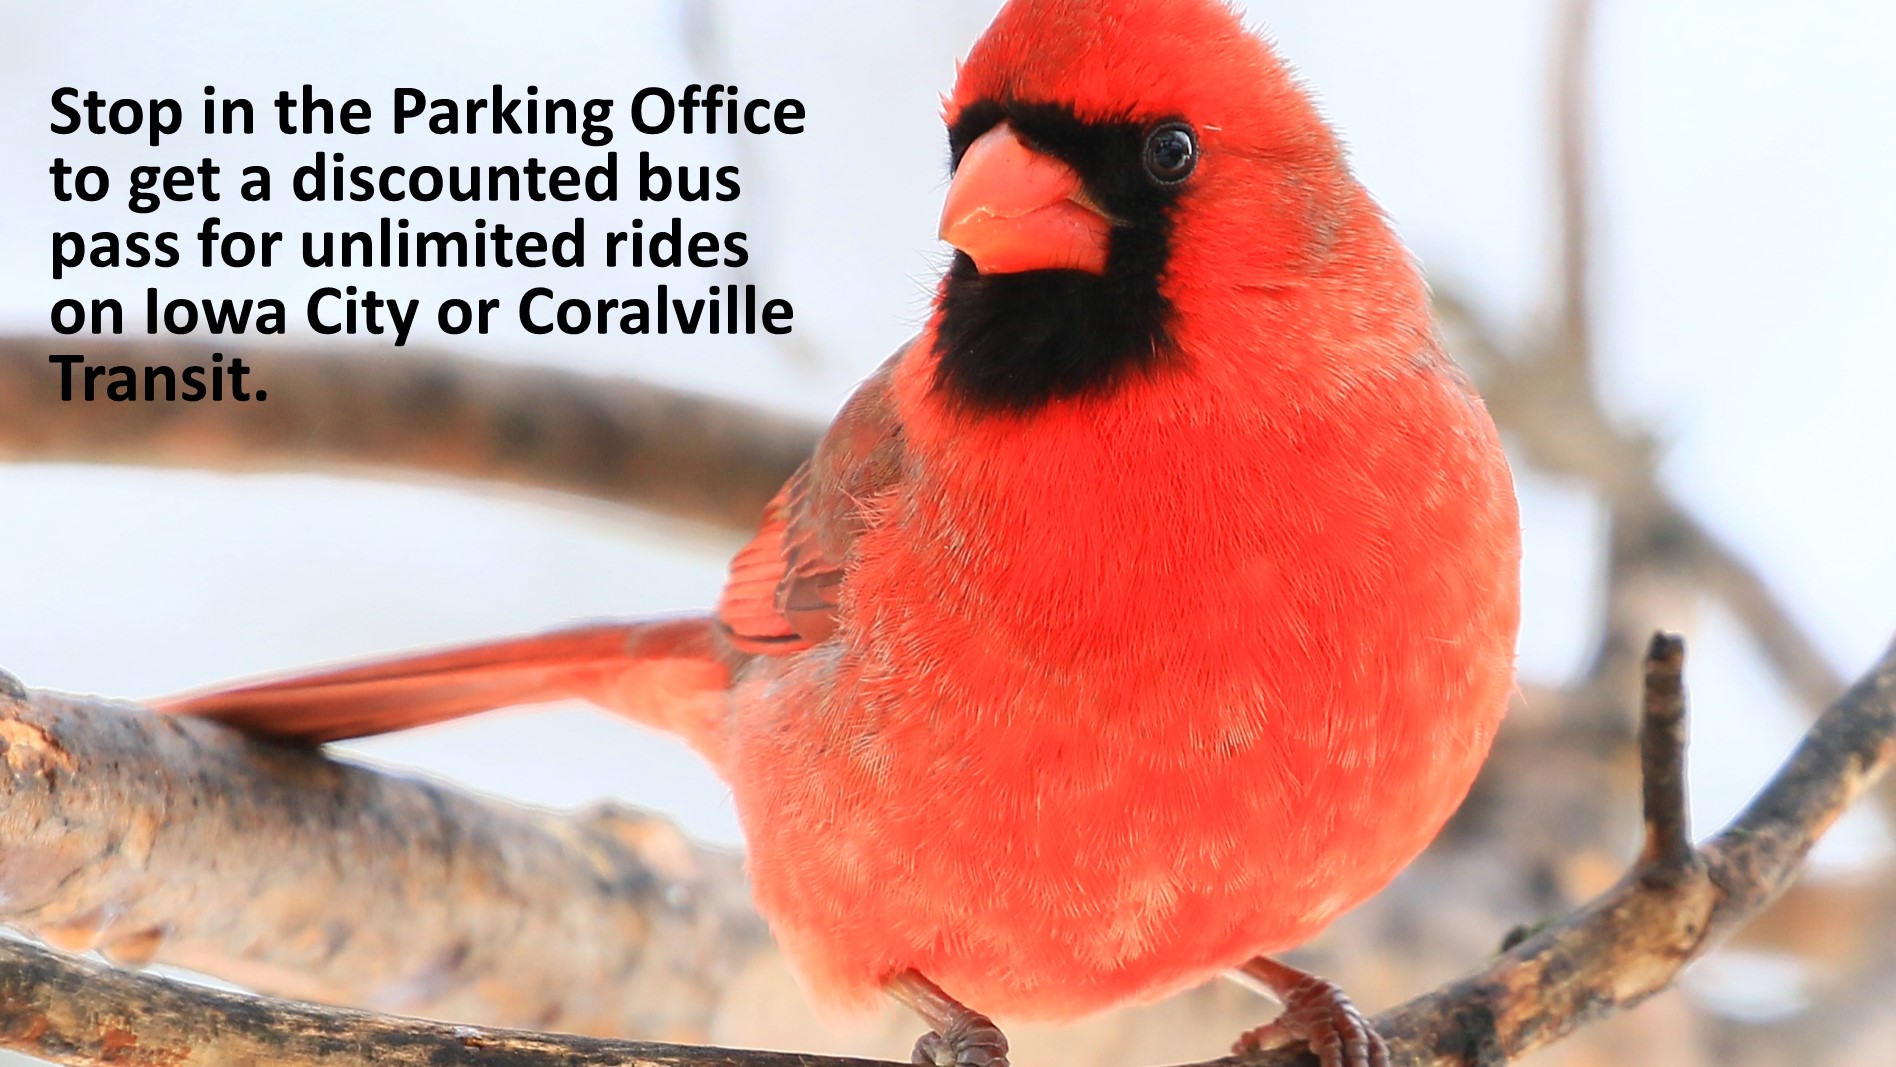 Get bus passes in the Parking Office